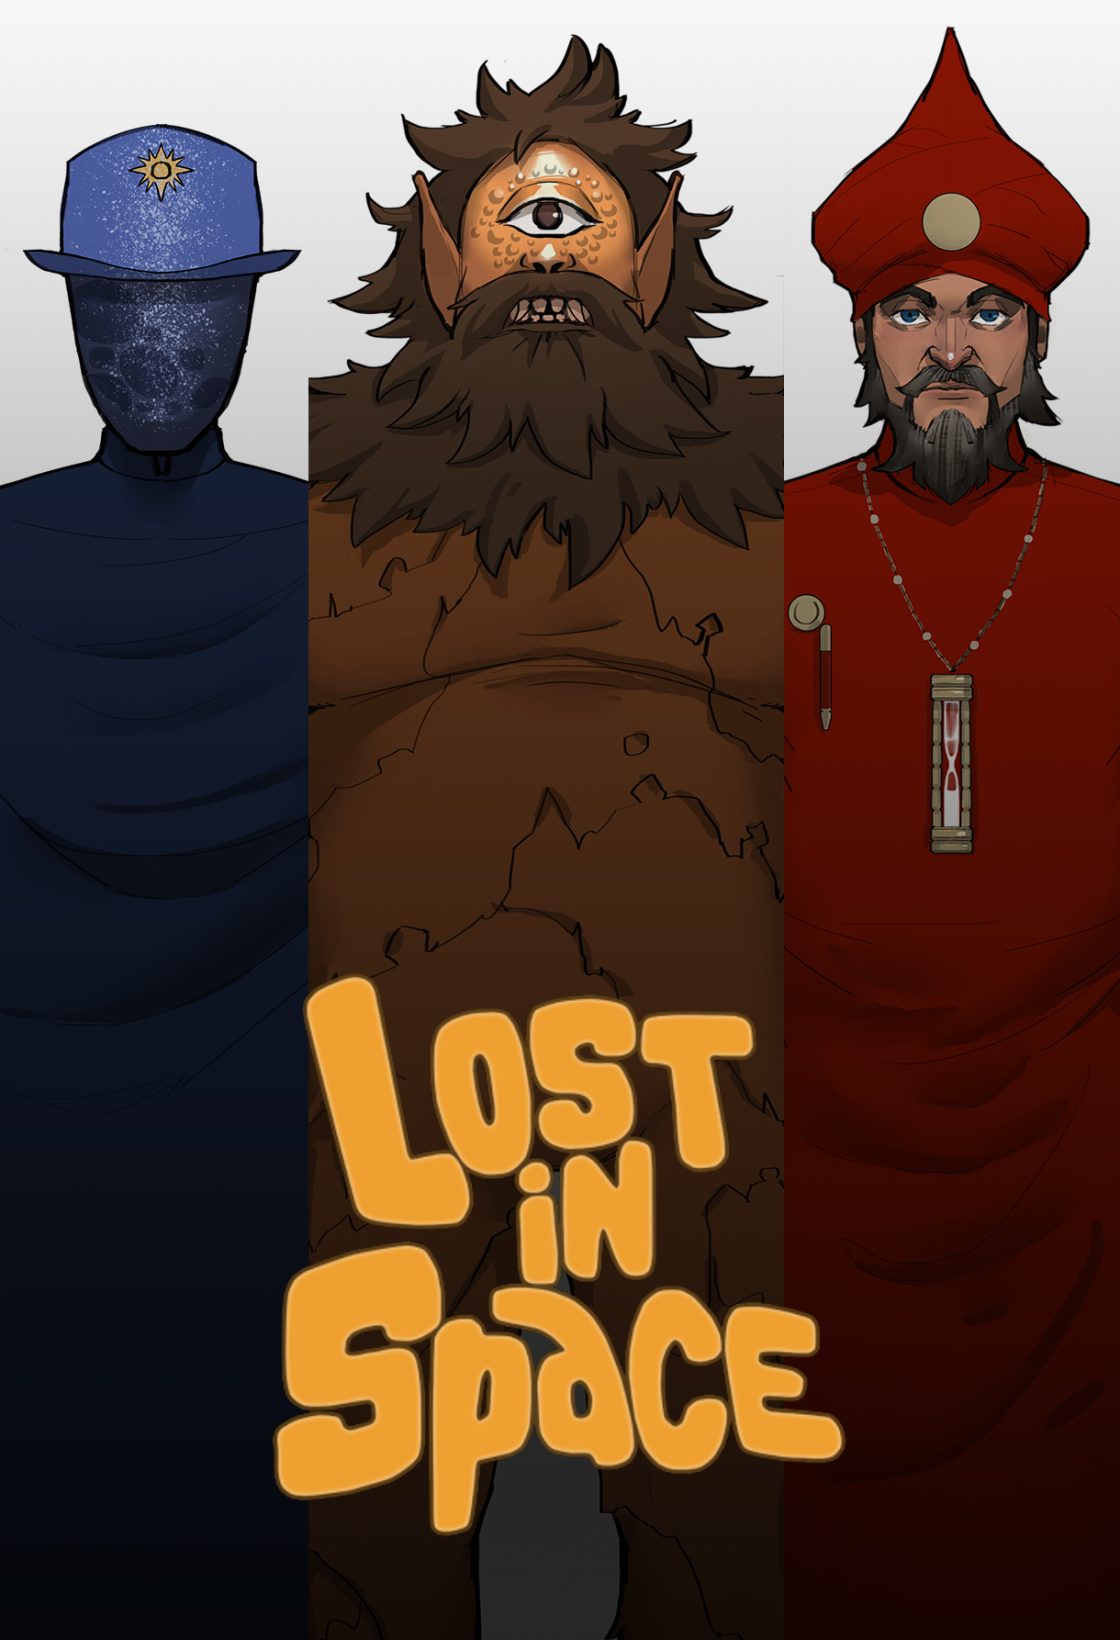 Lost In Space – The Adventure Game